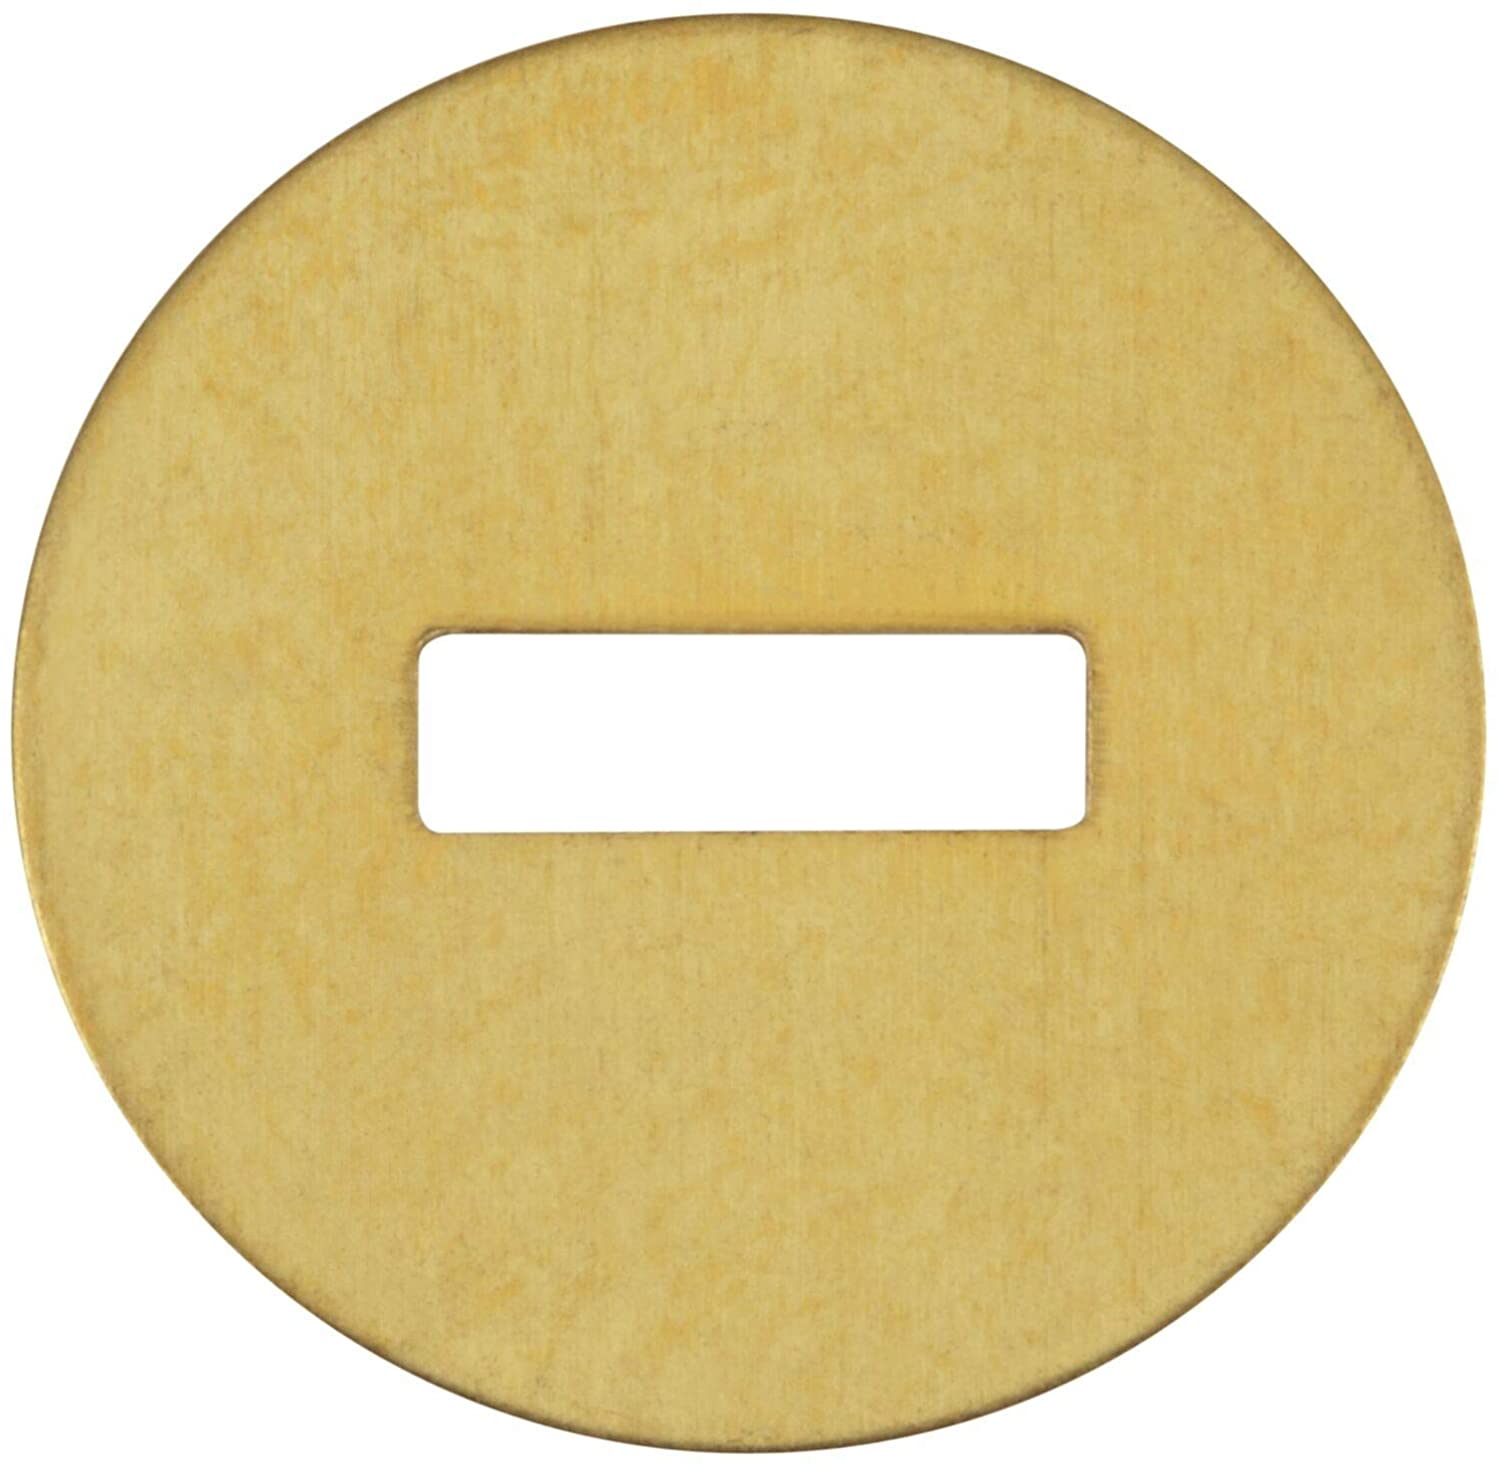 Brass Washers for Paper Fasteners/Brads, 1/2 Inch Slotted - 100 Pack